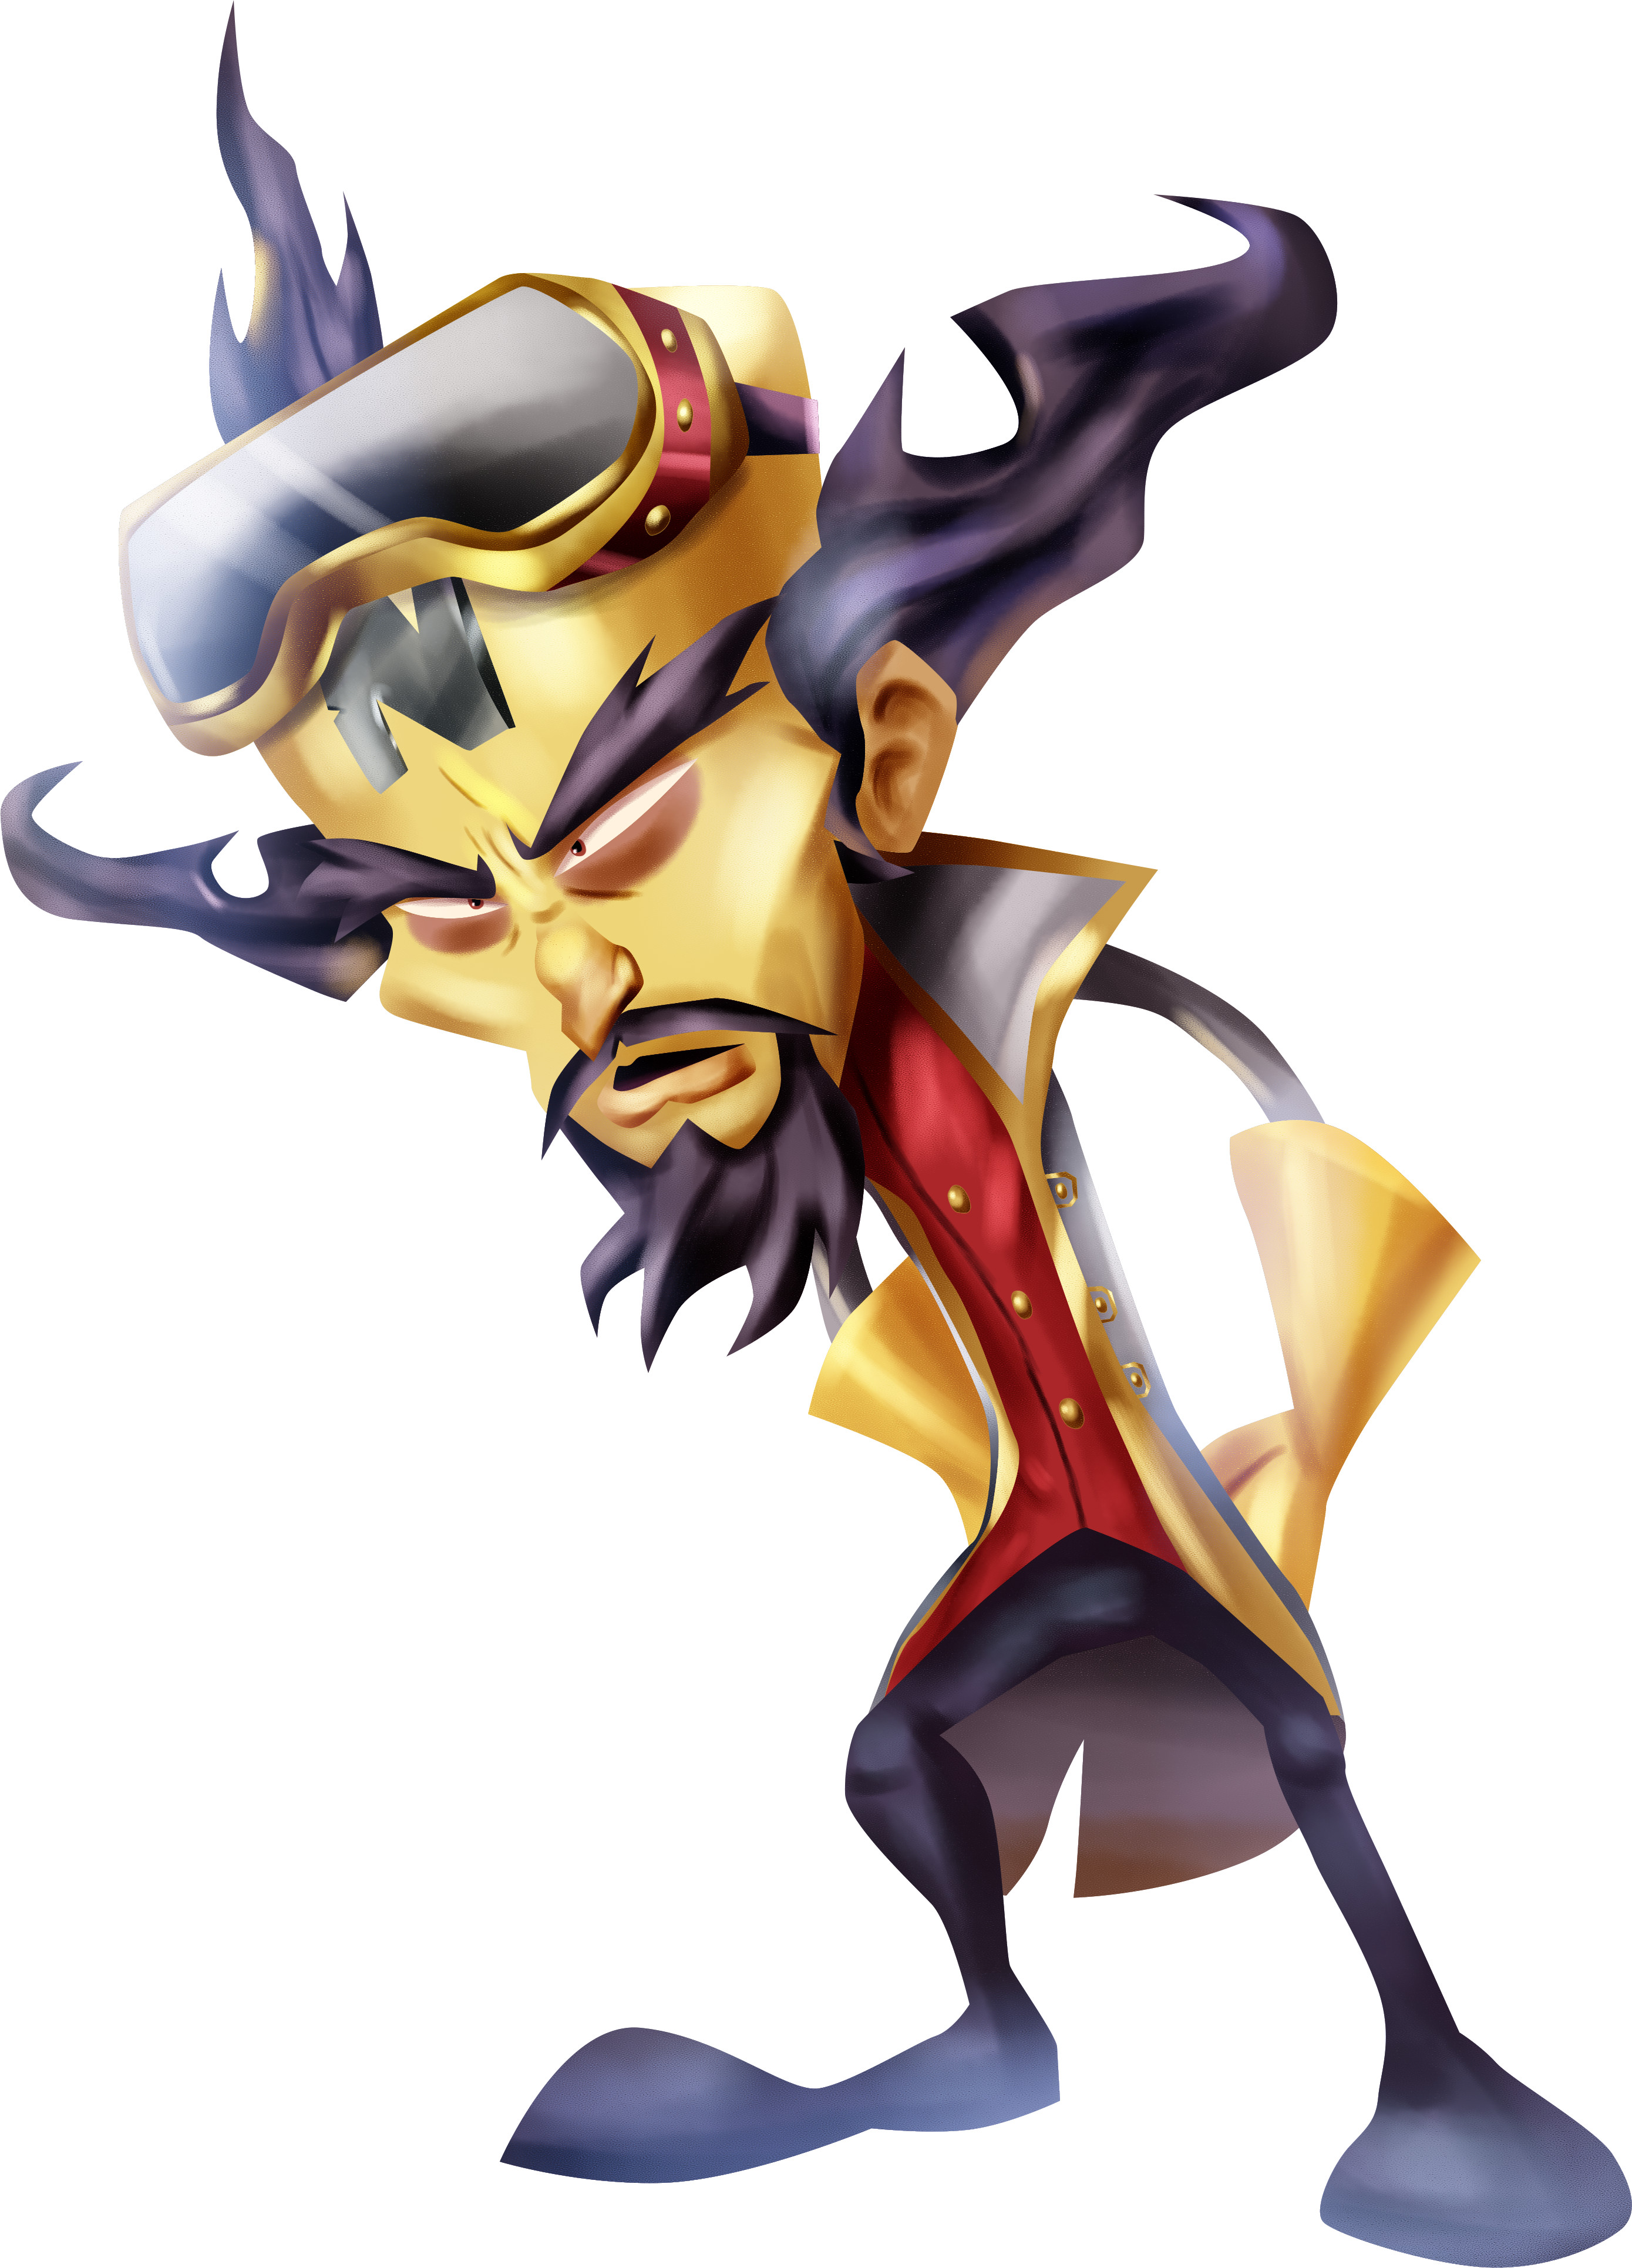 Dr. Cortex from Crash Bandicoot as the (mad) Scientist. His butt hurts.